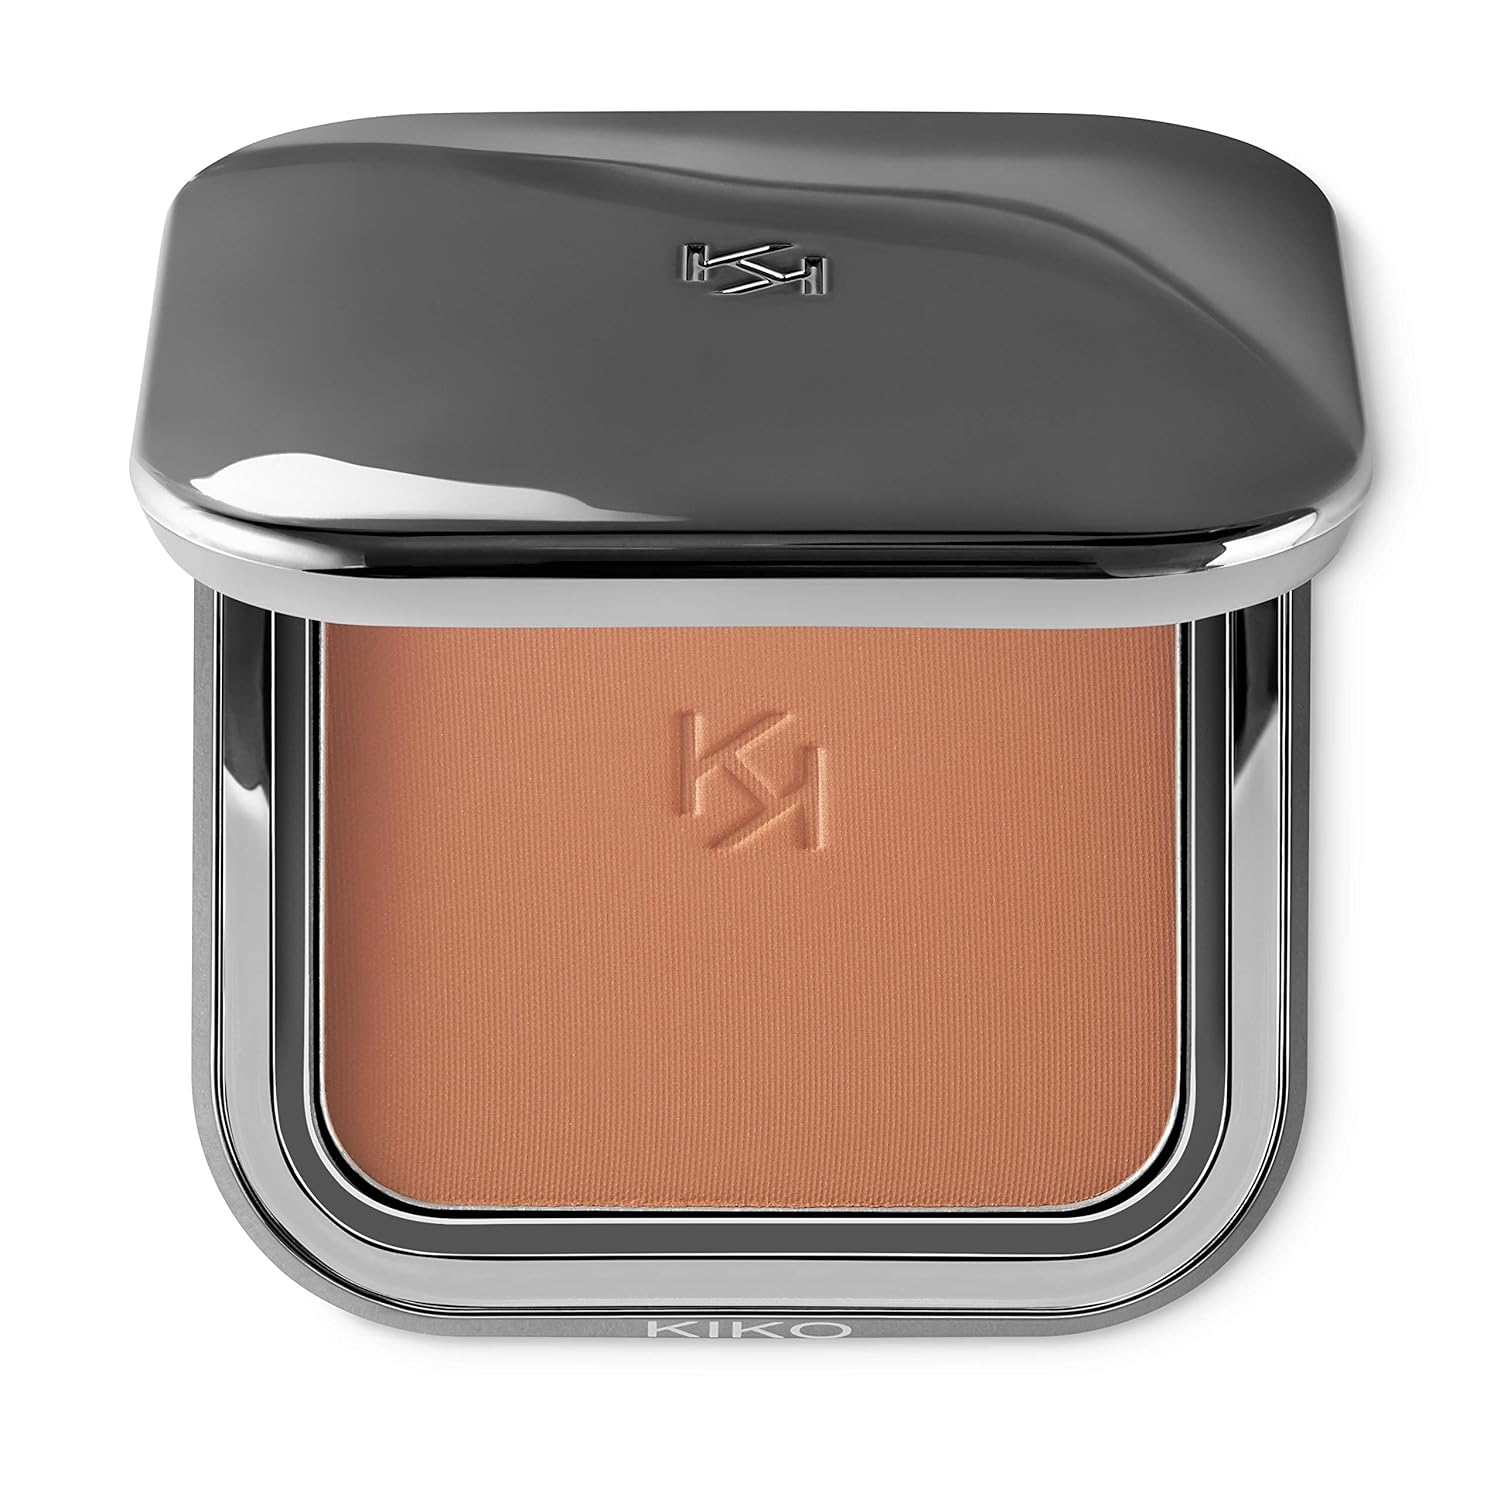 KIKO MILANO - awless Fusion Bronzer Powder 05 Bronzer for an even-looking complexion